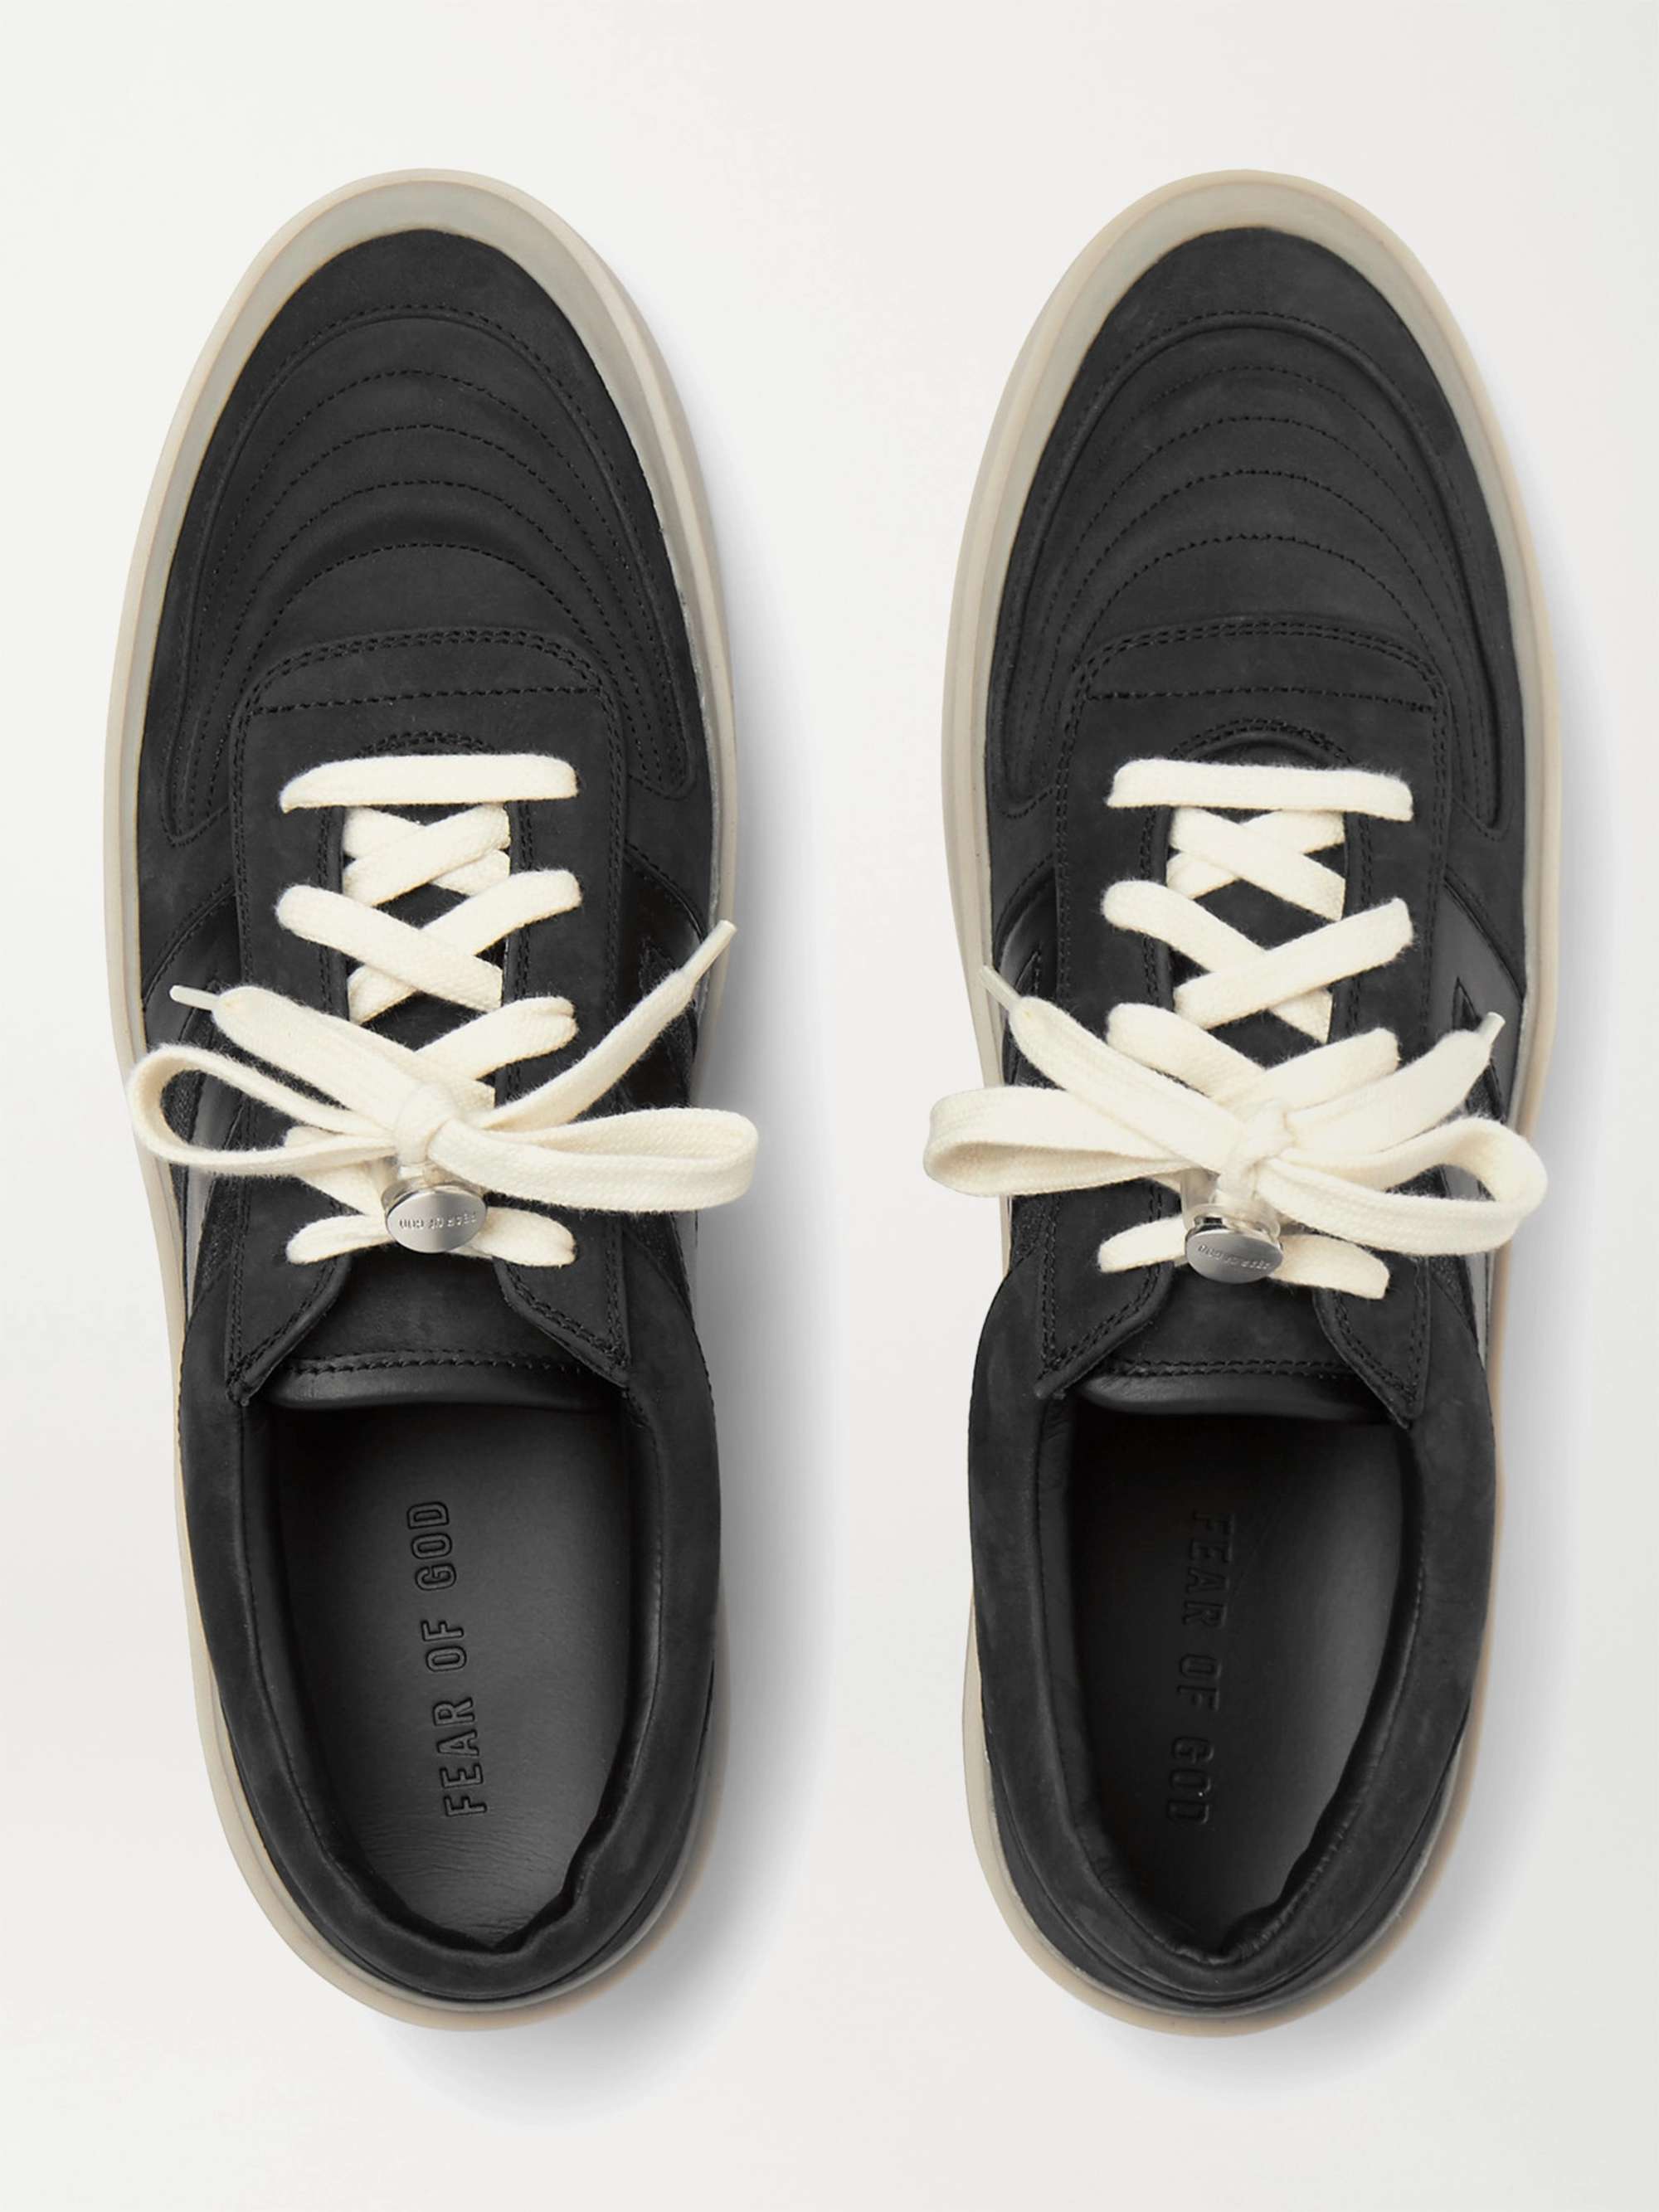 FEAR OF GOD Leather, Nubuck and Mesh Sneakers